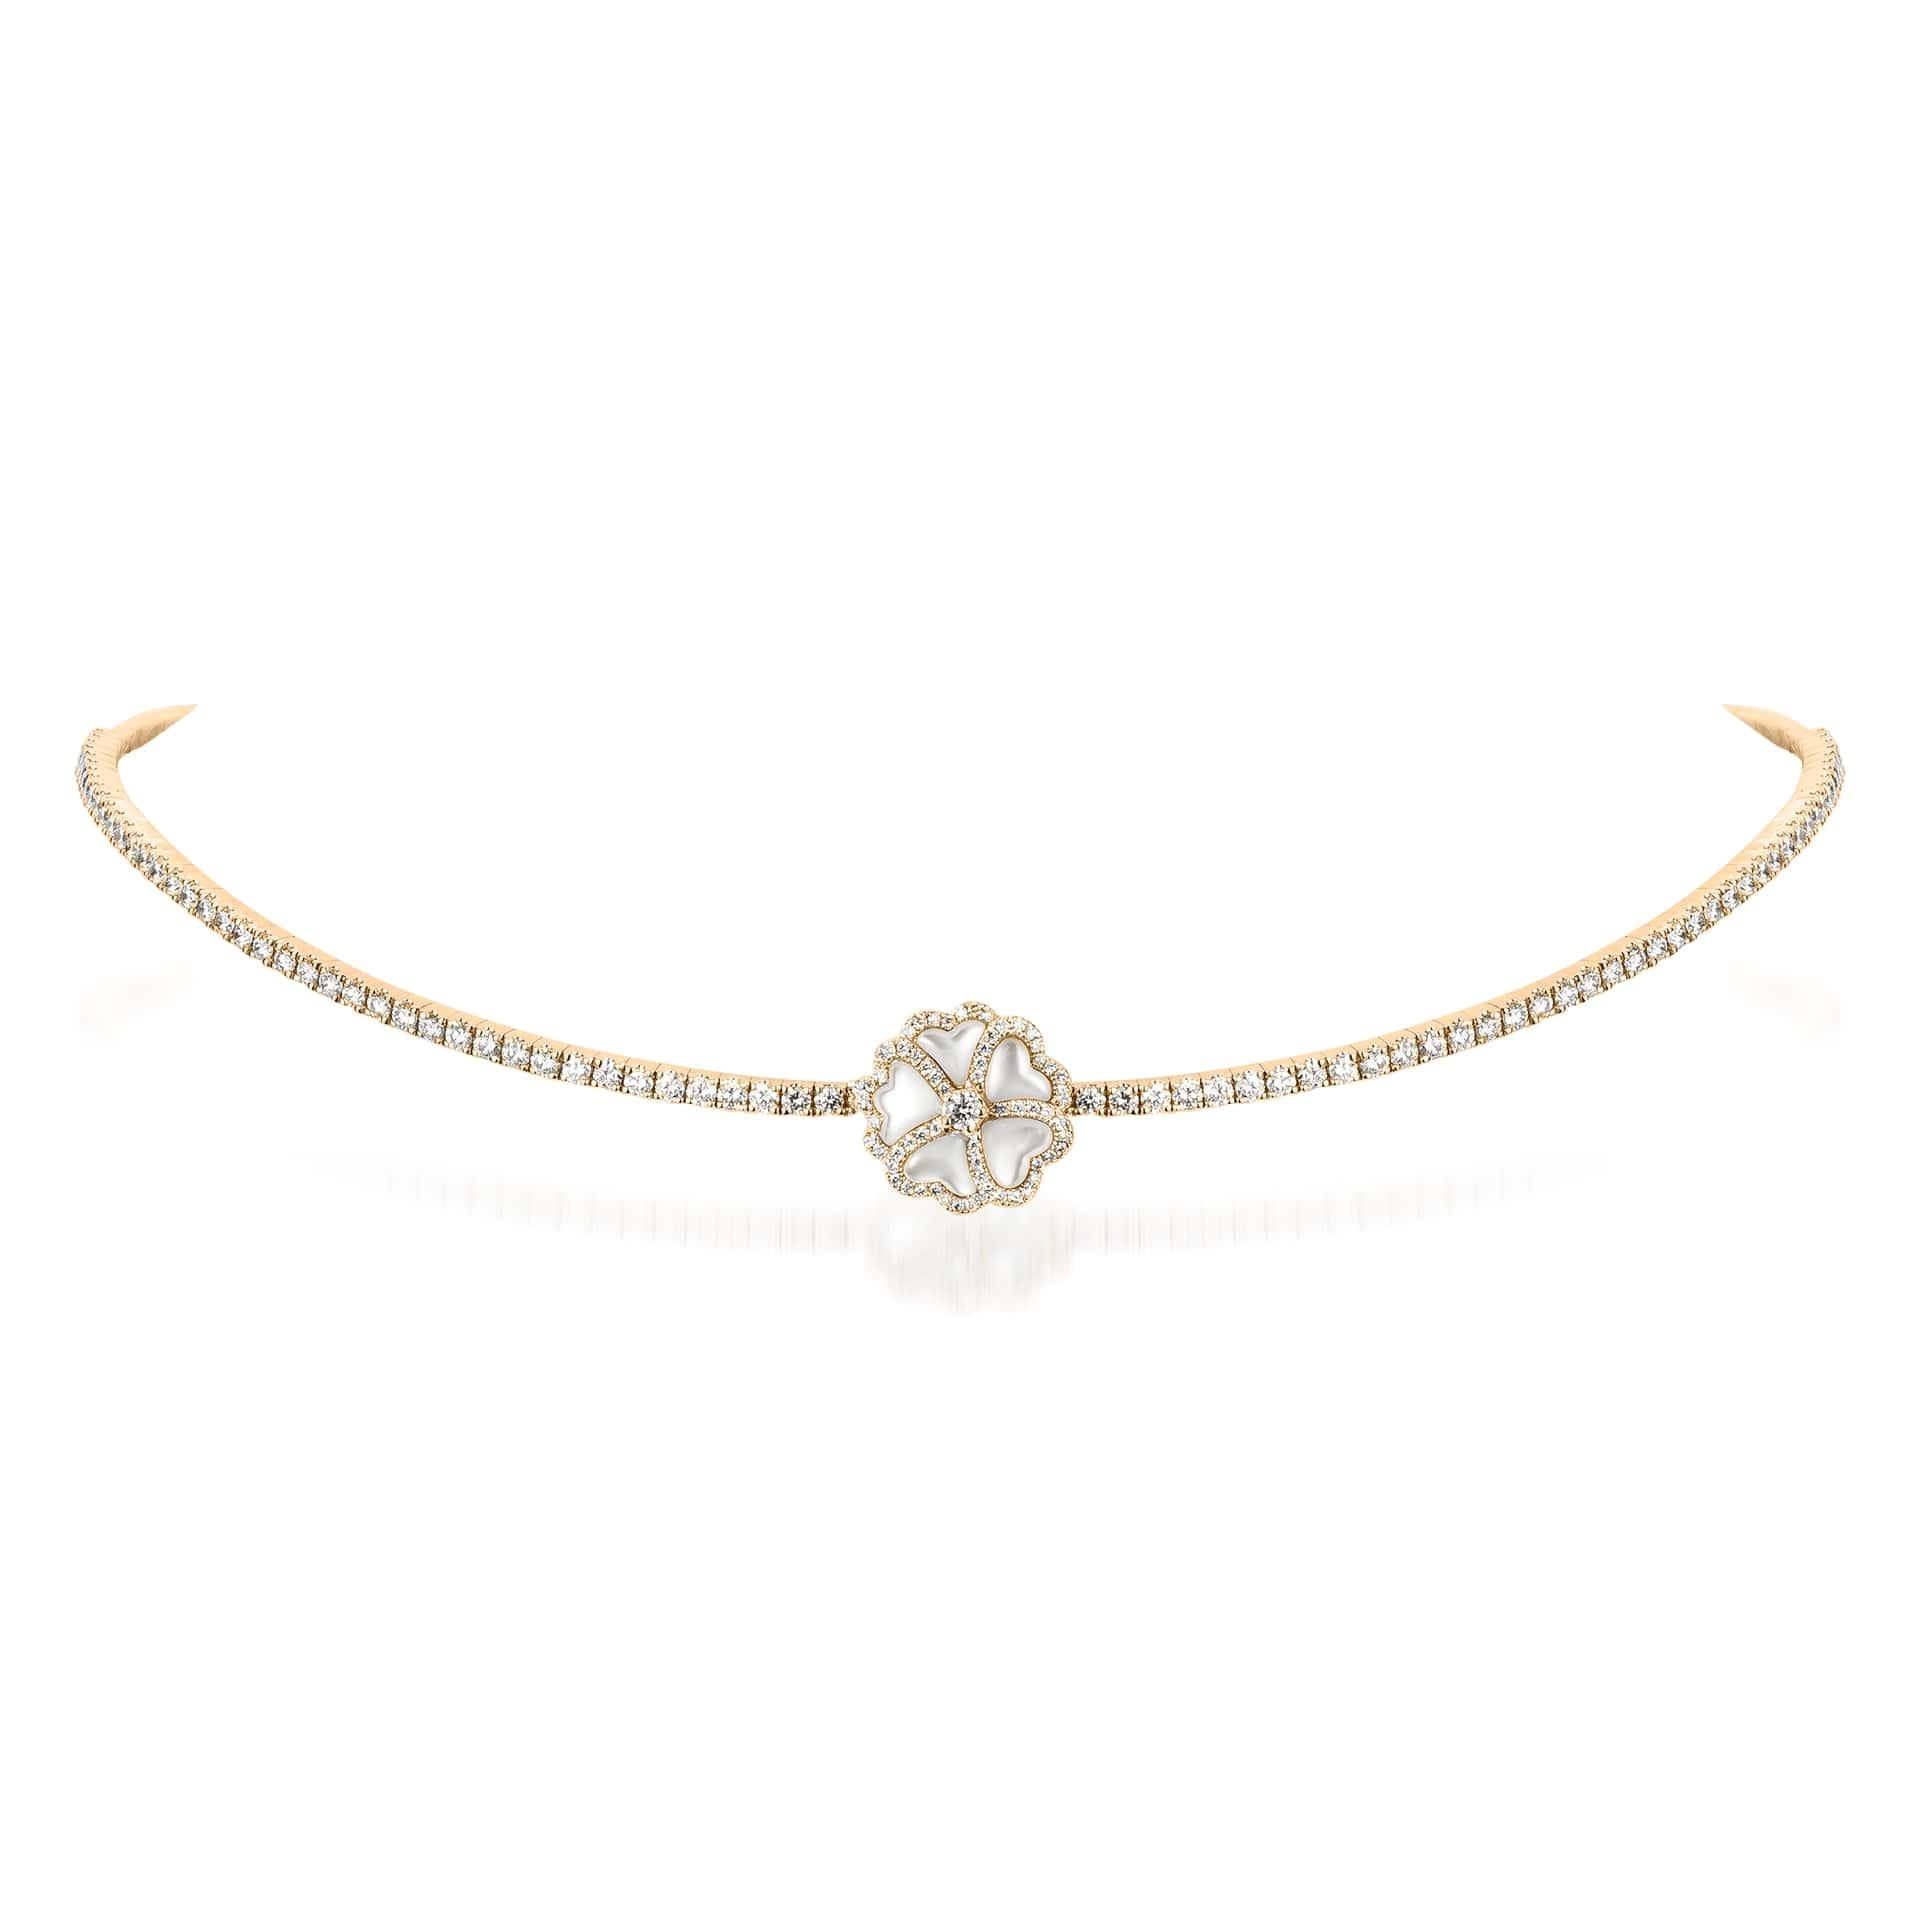 Bloom Diamond and Mother-of-Pearl Flower Choker Necklace in 18K Yellow Gold

Inspired by the exquisite petals of the alpine cinquefoil flower, the Bloom collection combines the richness of diamonds and precious metals with the light versatility of